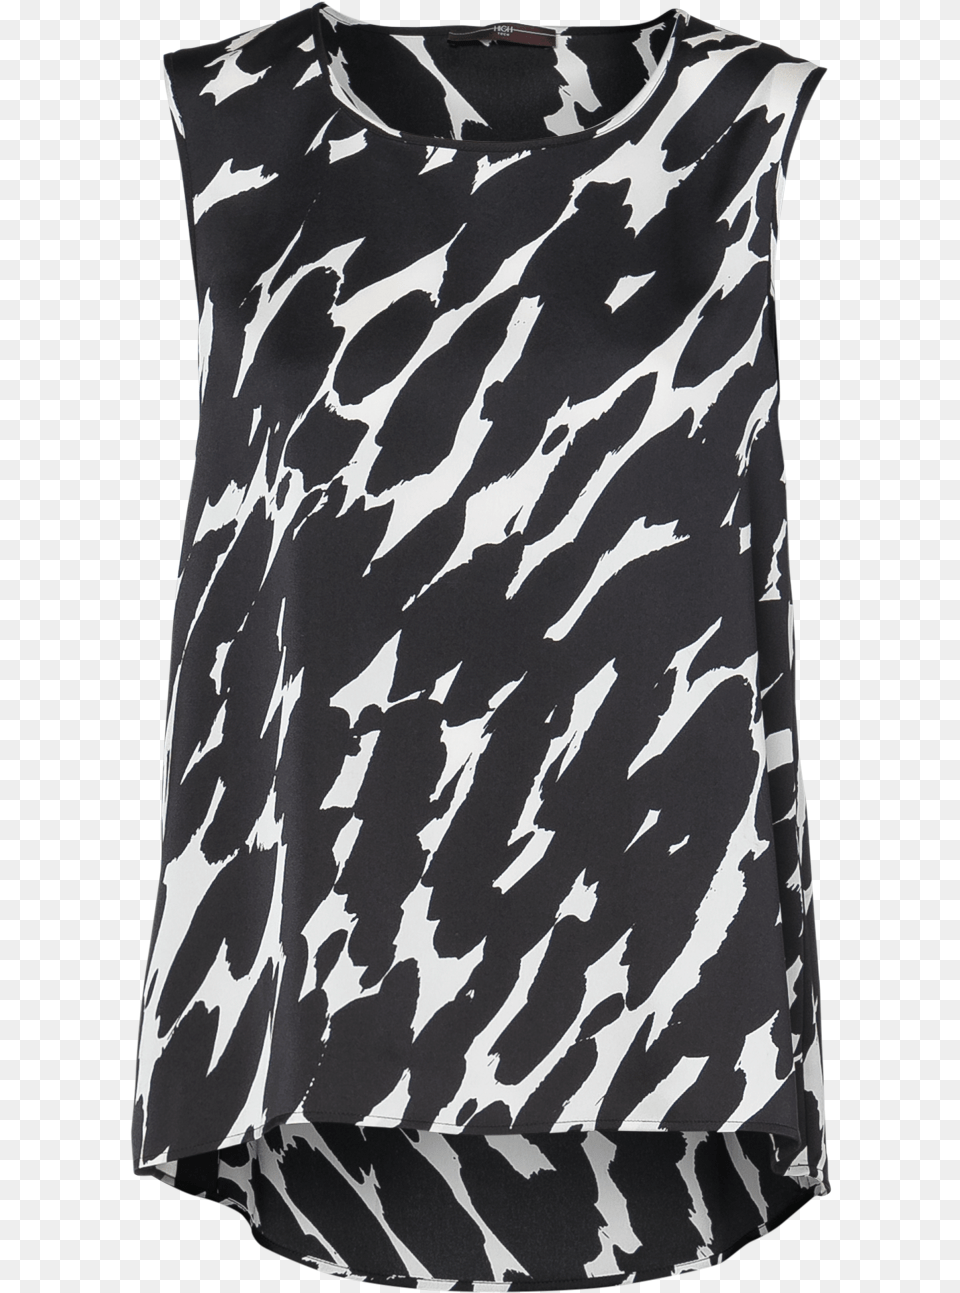 Cue A Line Tank With Black Brushstroke Print Sleeveless, Military, Military Uniform, Camouflage, Adult Png Image